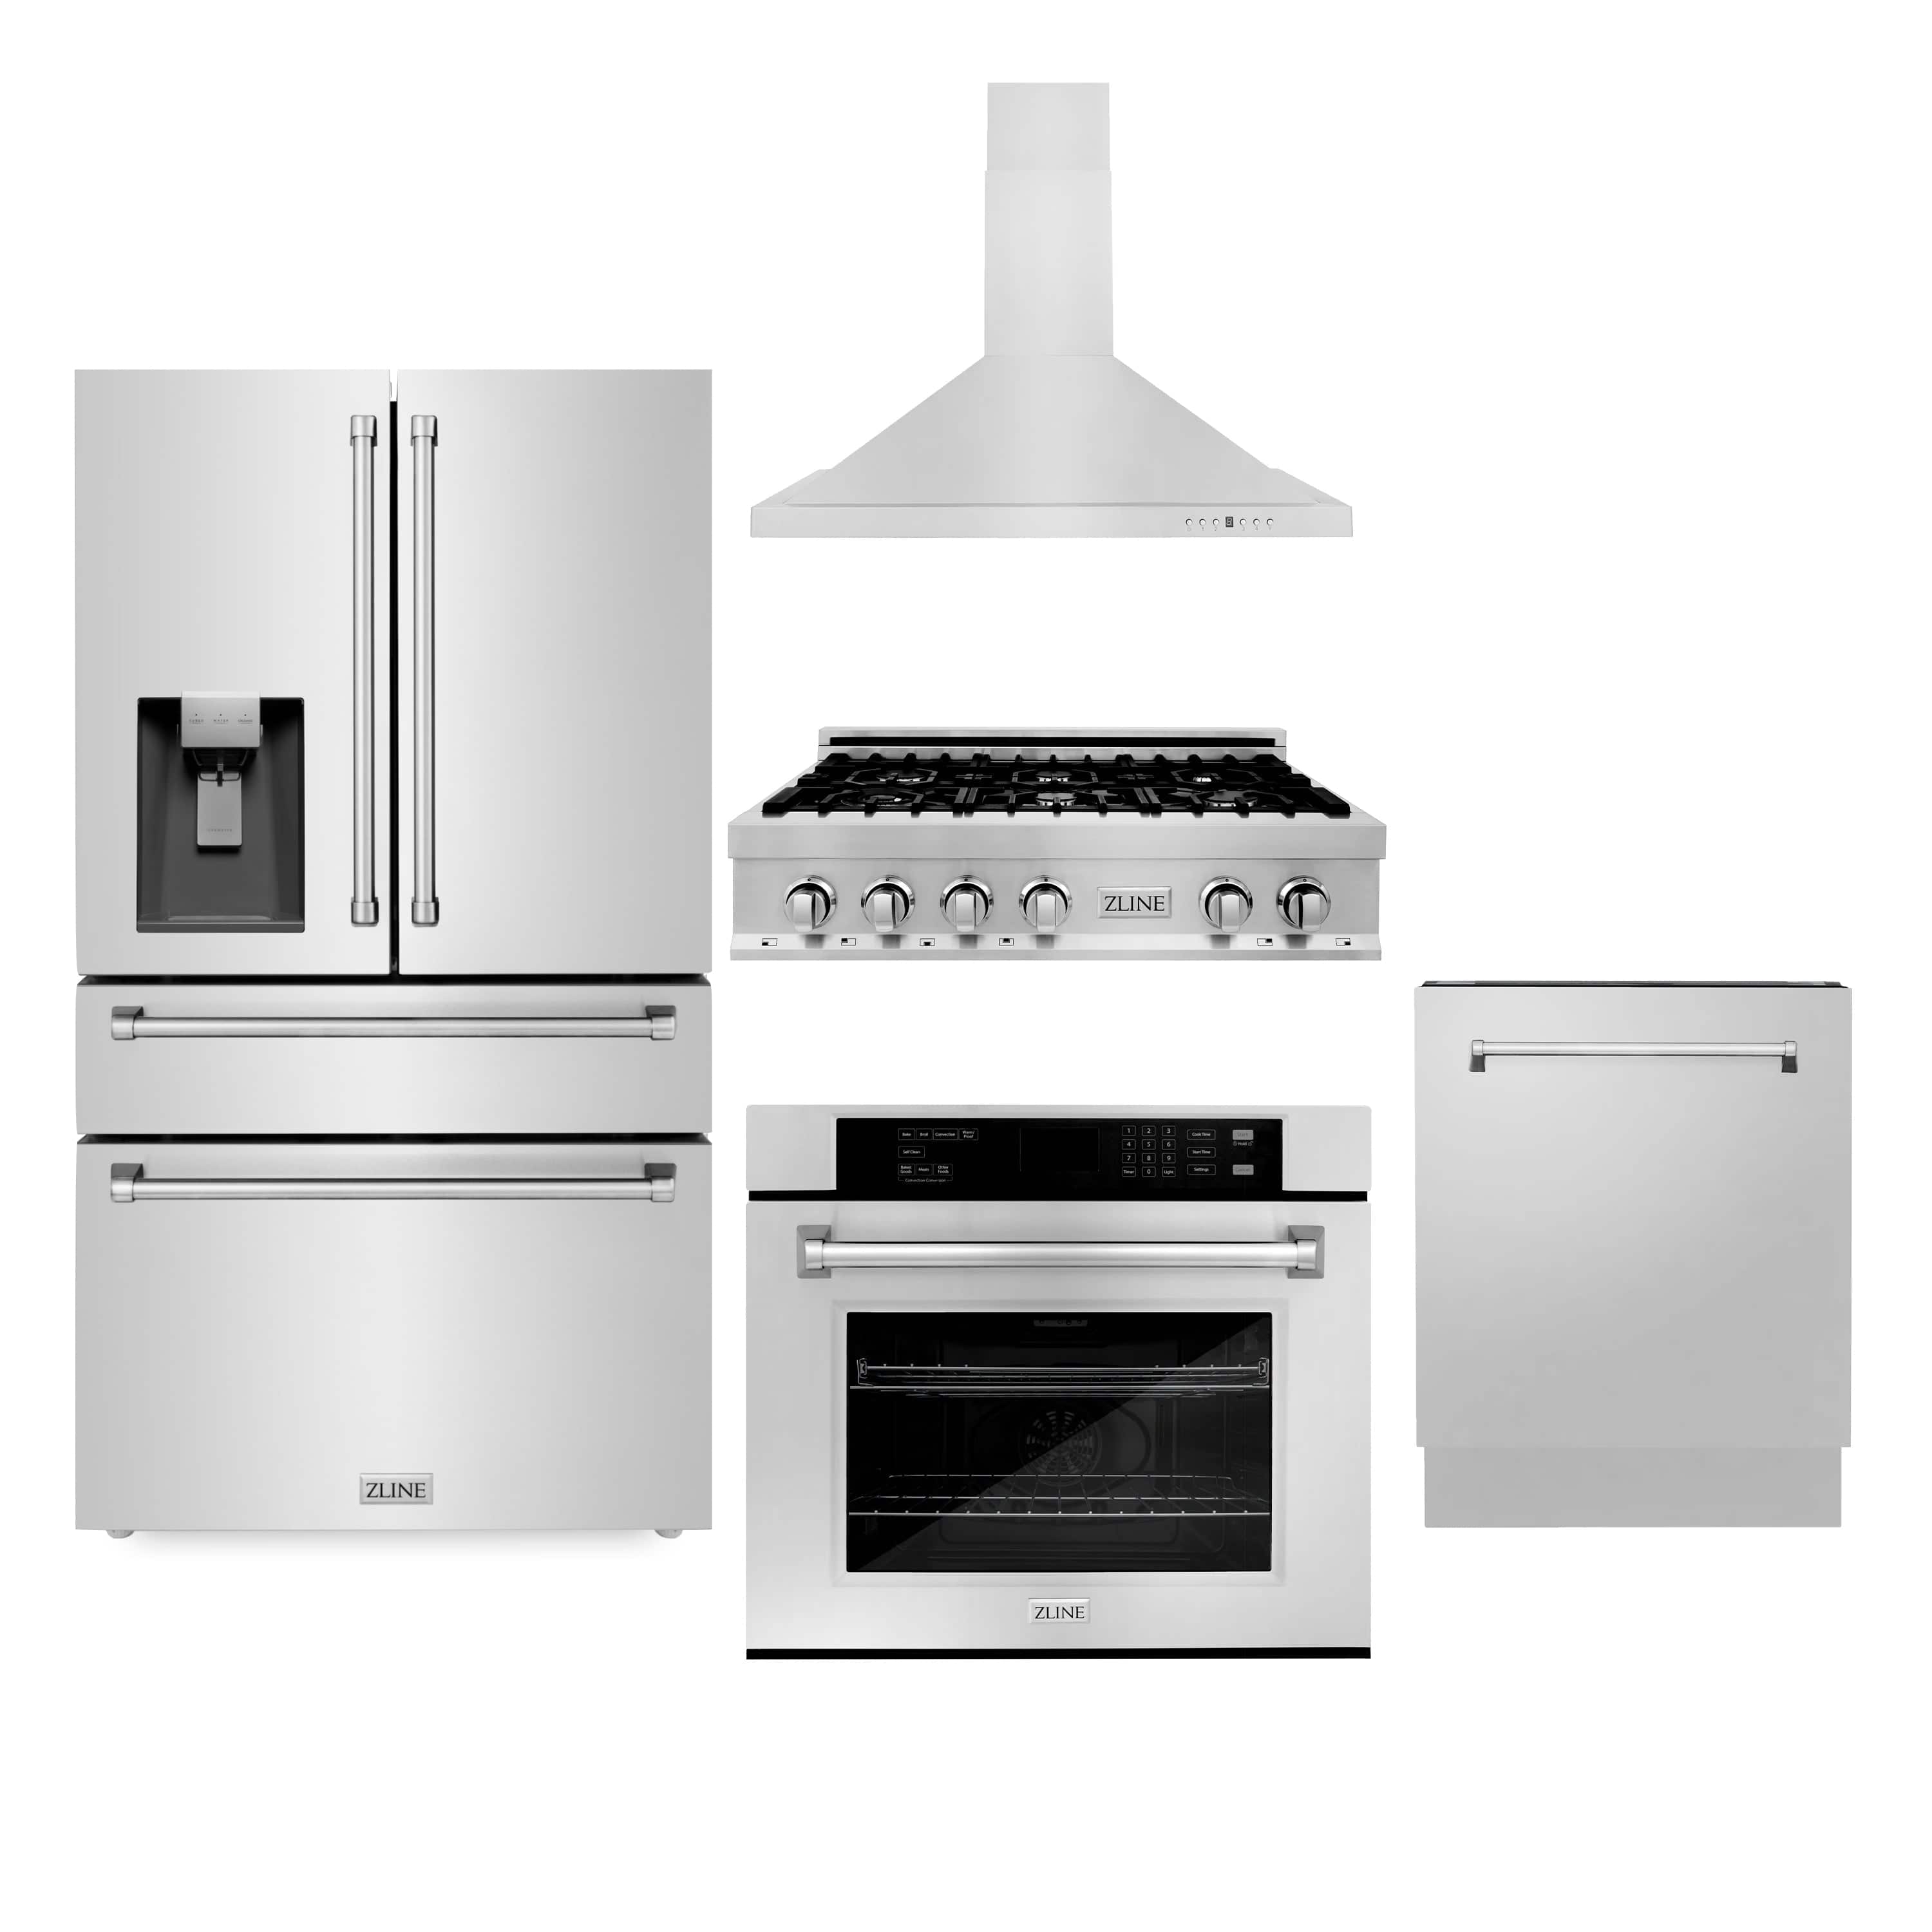 ZLINE 5-Piece Appliance Package - 36-Inch Rangetop, Refrigerator with Water Dispenser, 30-Inch Electric Wall Oven, 3-Rack Dishwasher, and Convertible Wall Mount Hood in Stainless Steel (5KPRW-RTRH36-AWSDWV)